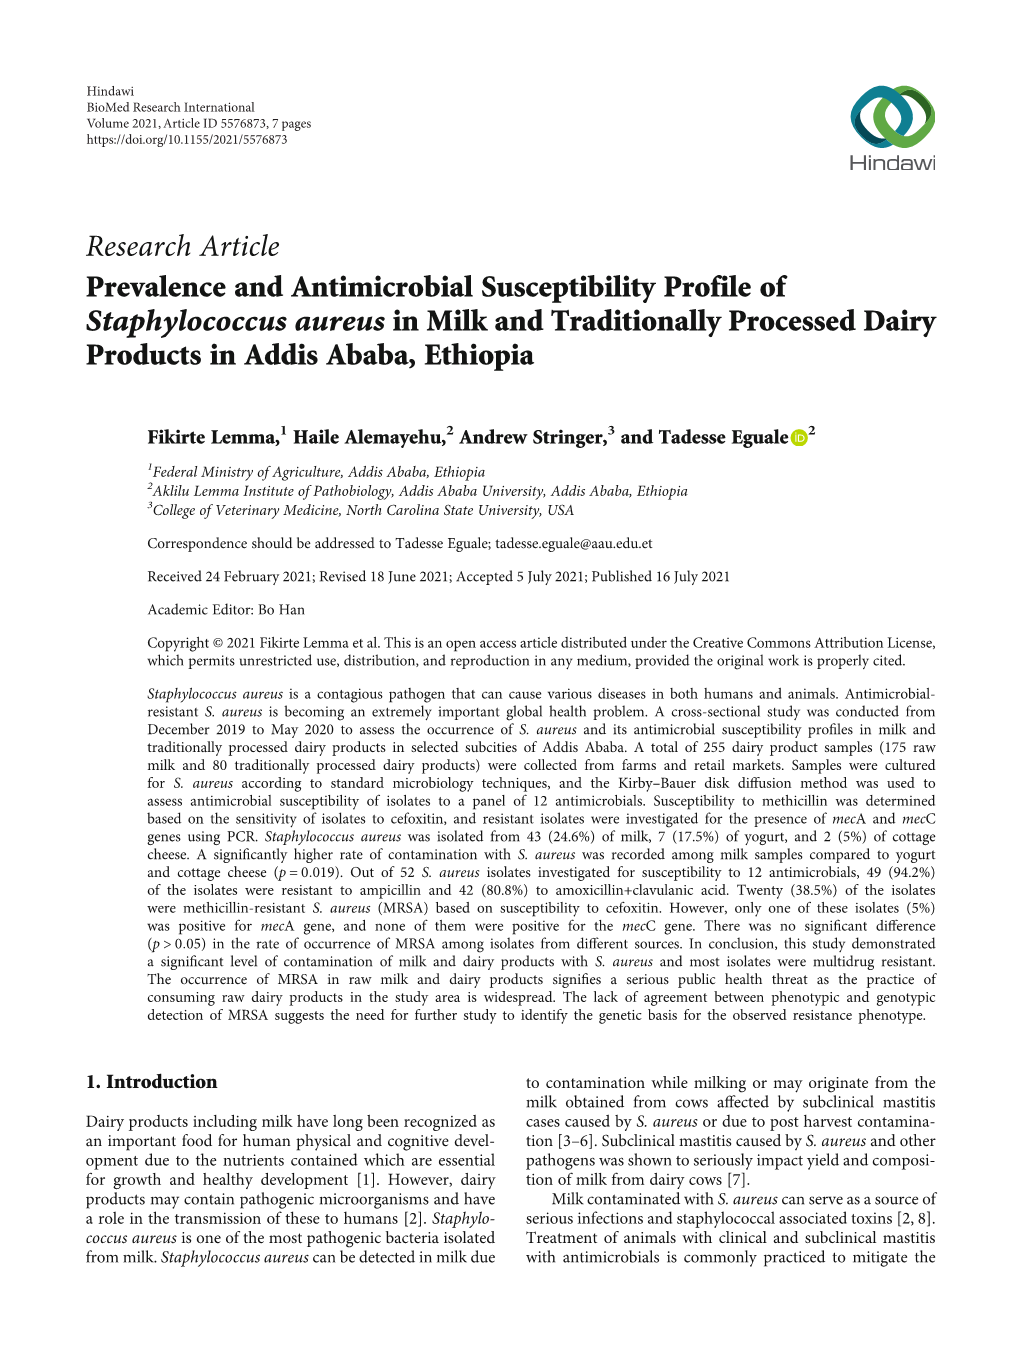 Prevalence and Antimicrobial Susceptibility Profile of Staphylococcus Aureus in Milk and Traditionally Processed Dairy Products in Addis Ababa, Ethiopia